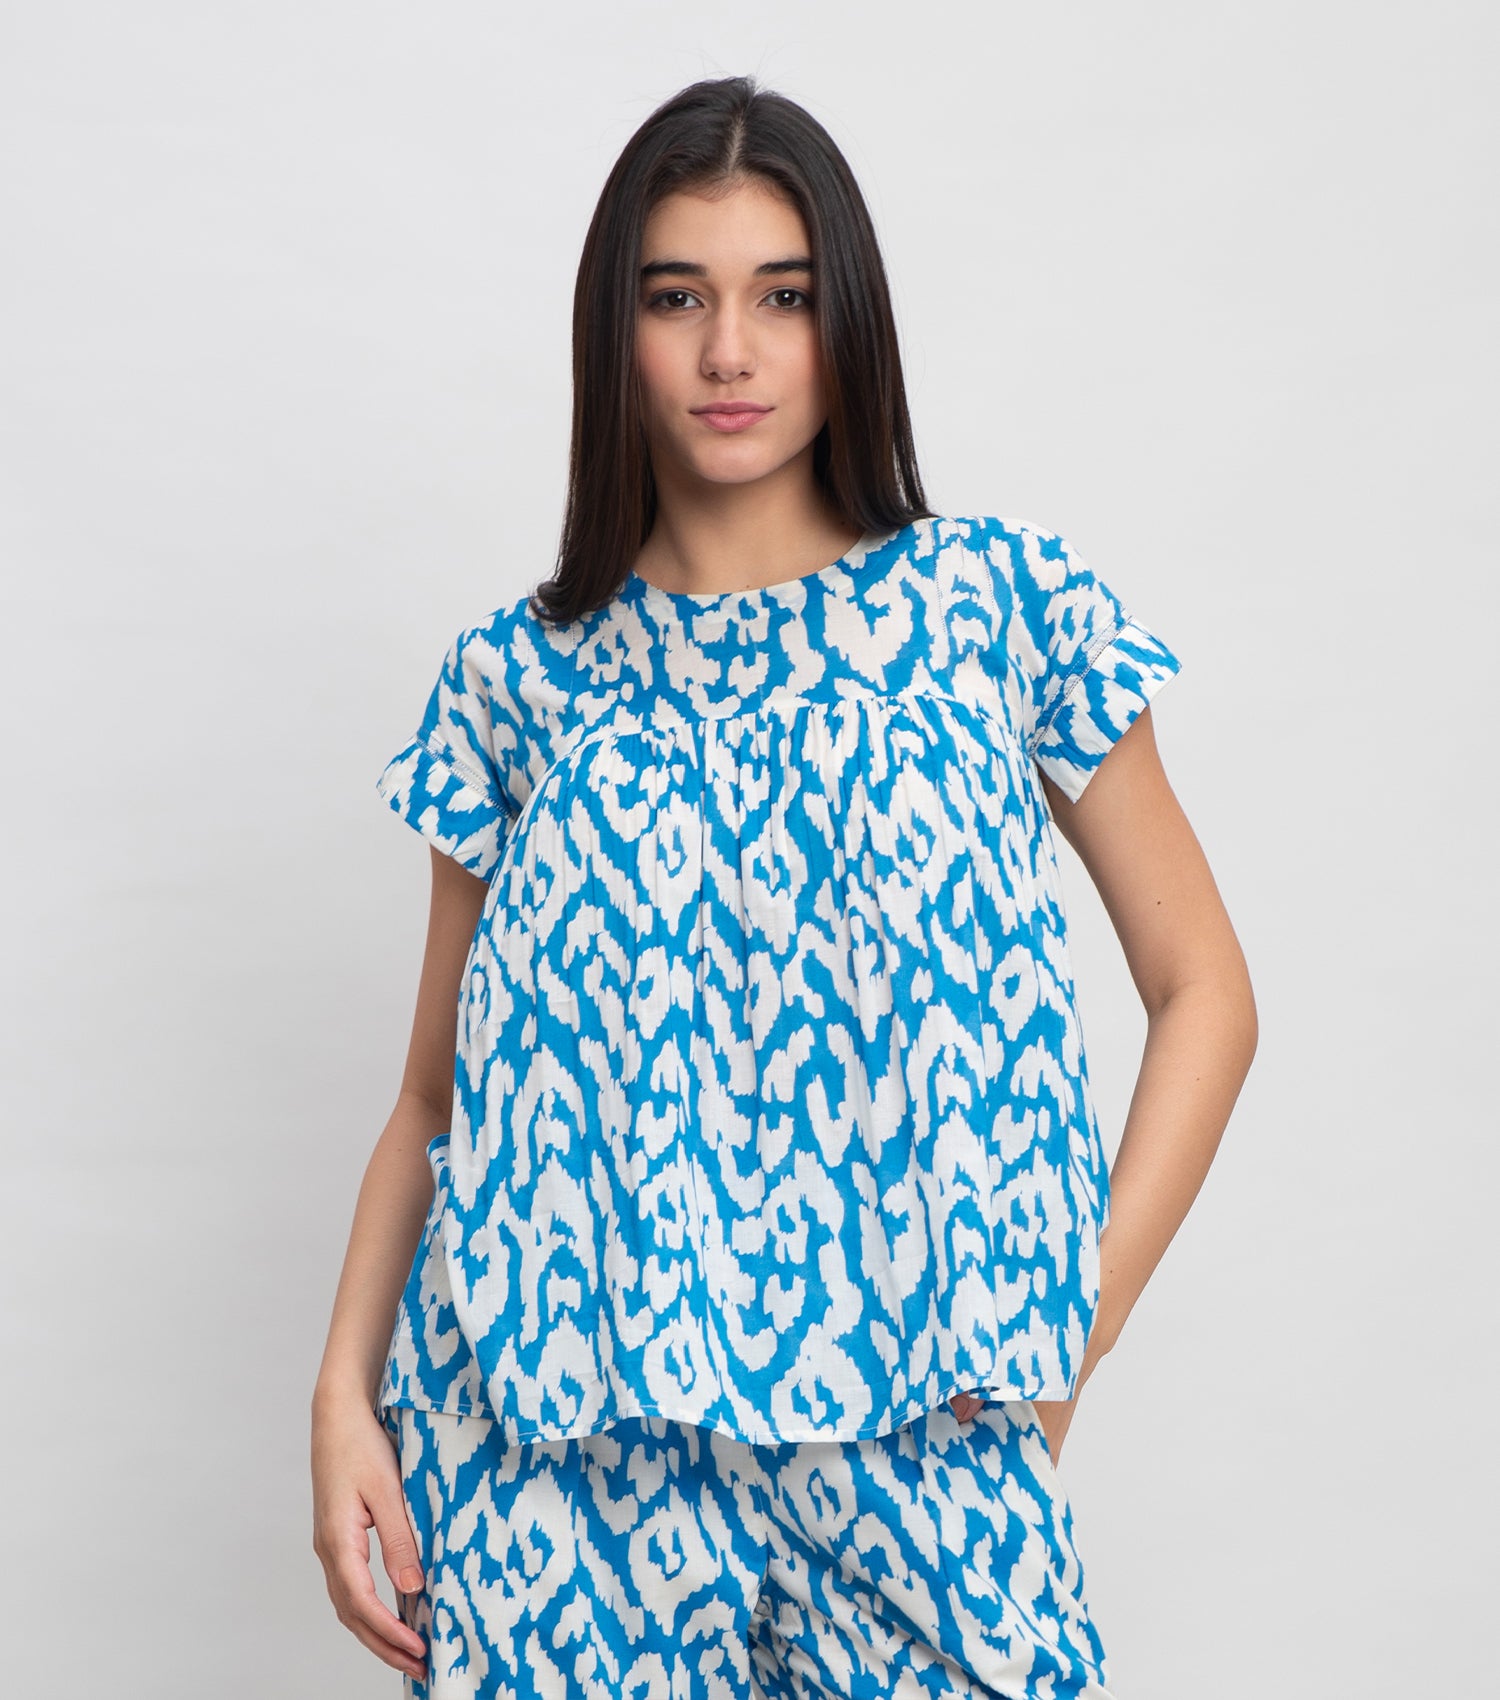 Sky Blue Cotton Printed Top with pintucks On Yoke & Thread Detail On Sleeves